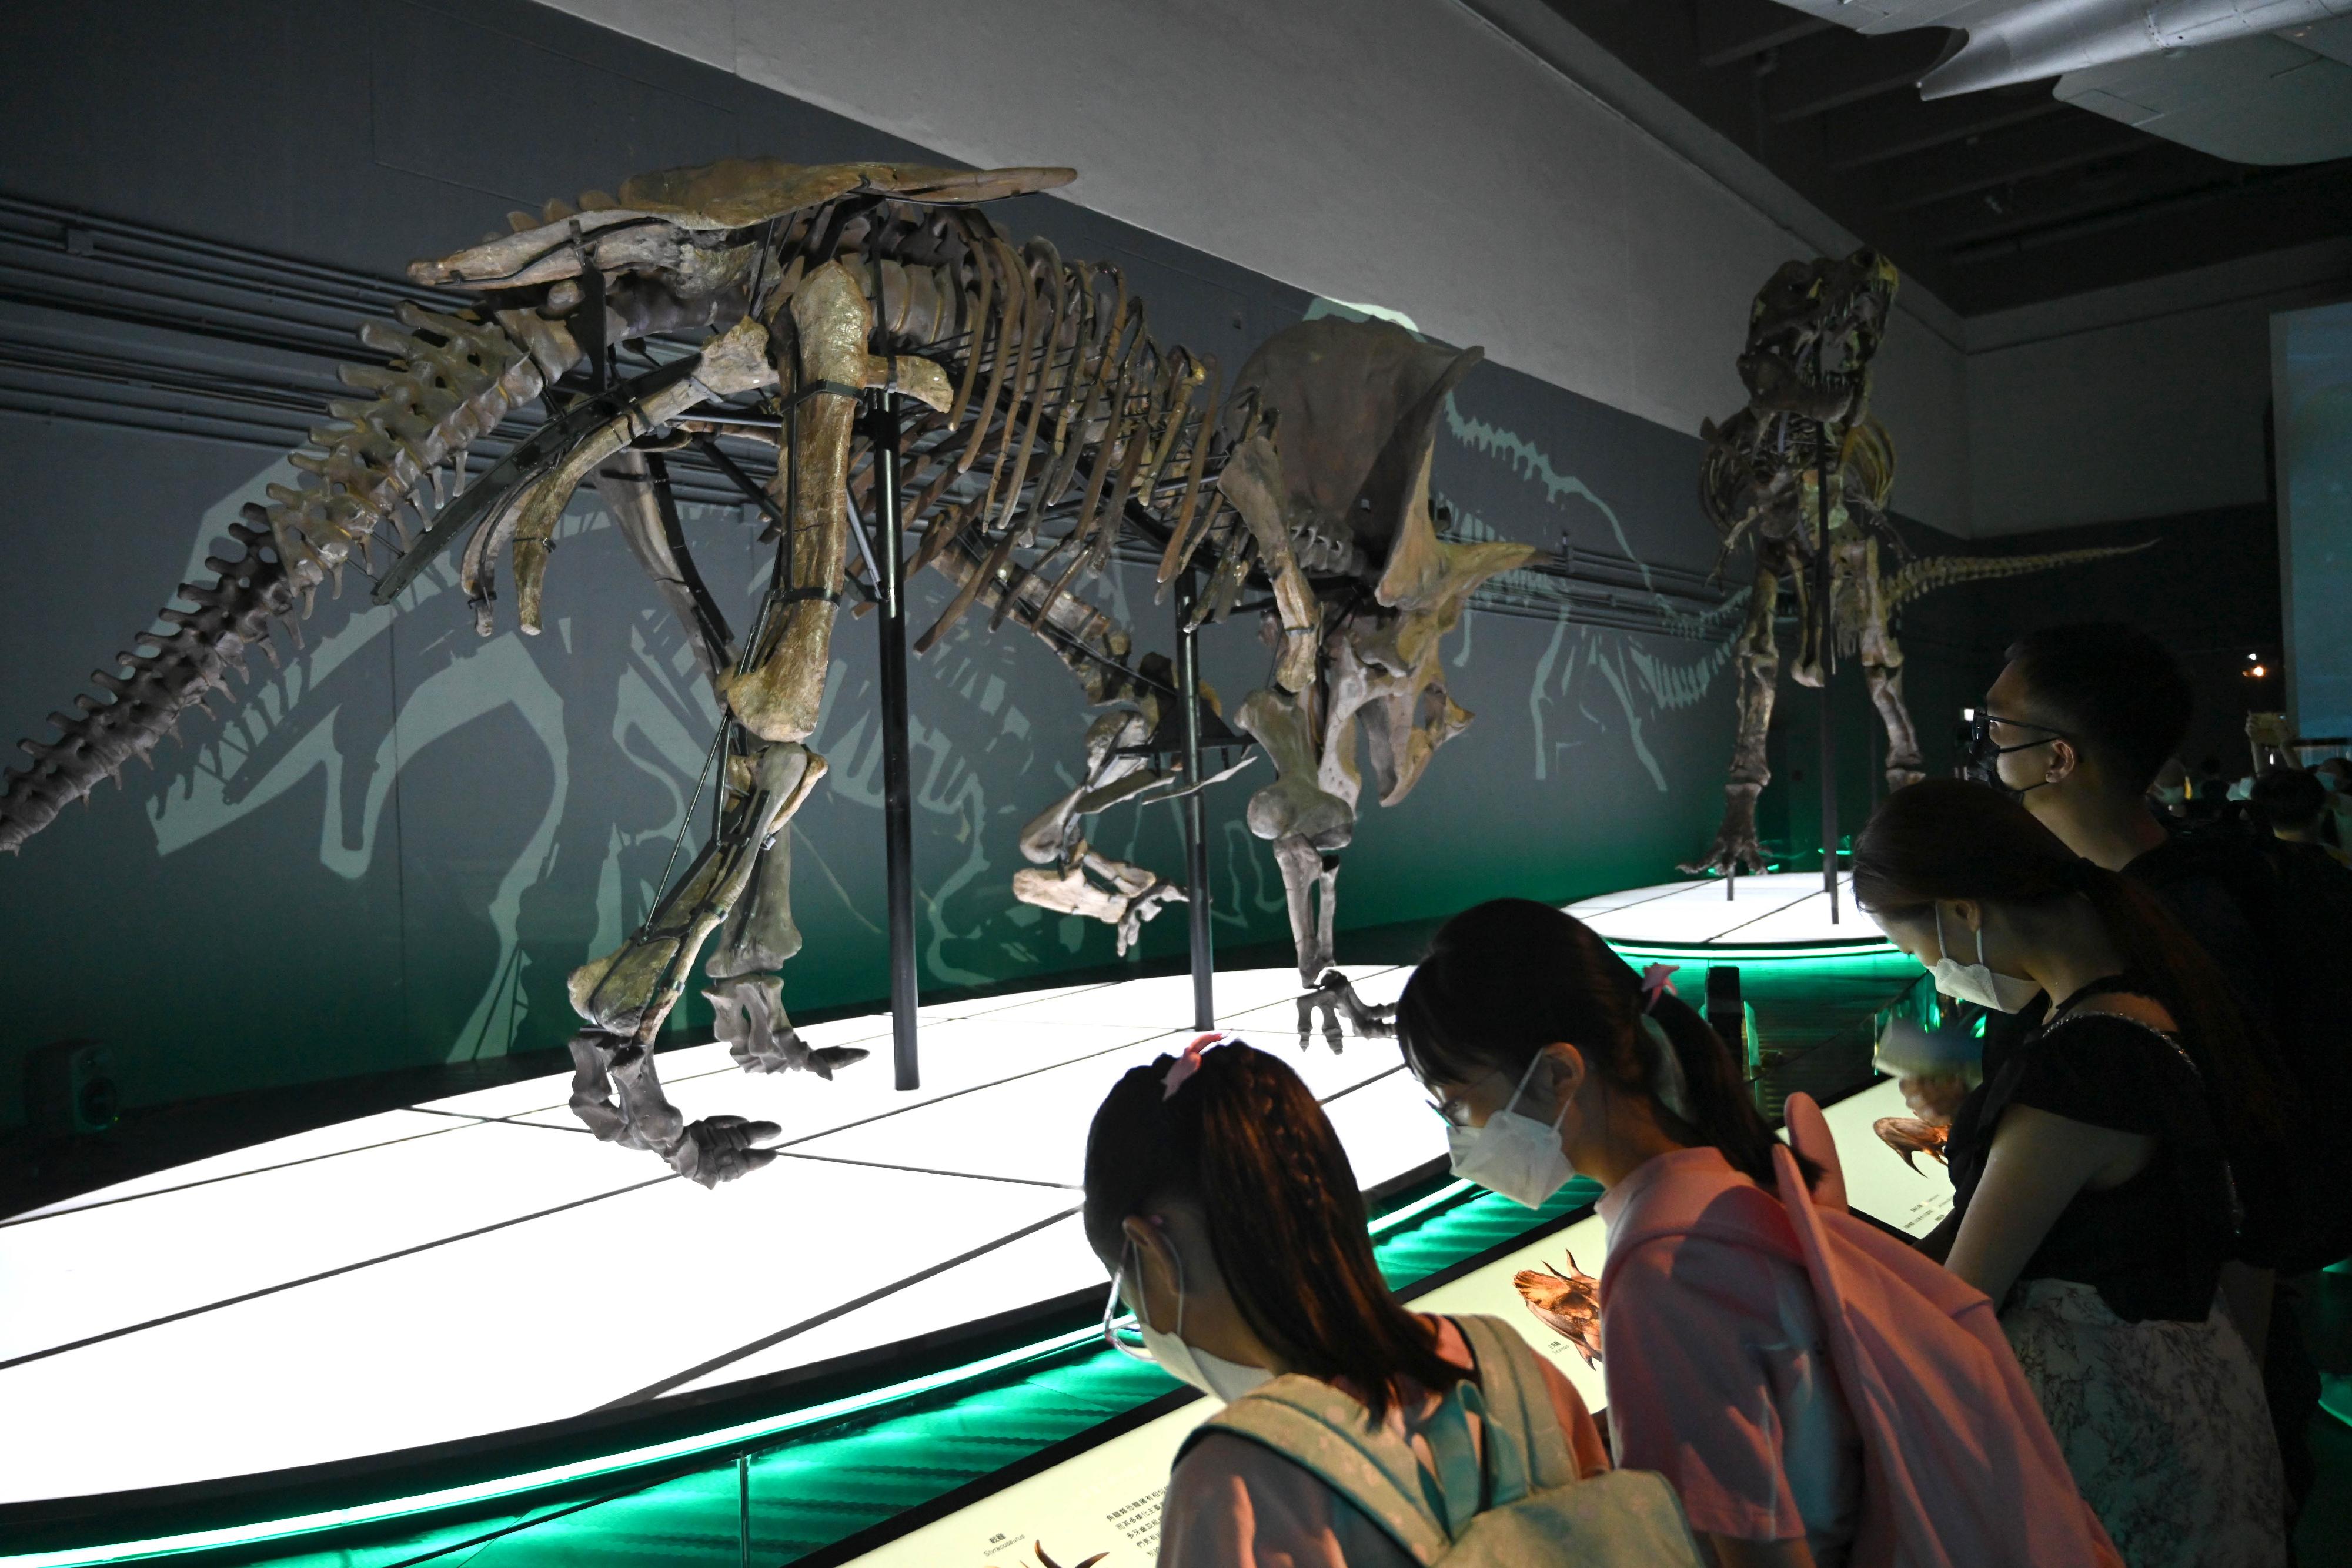 The Hong Kong Science Museum's free large-scale dinosaur exhibition, "The Hong Kong Jockey Club Series: The Big Eight - Dinosaur Revelation" has received an overwhelming public response since its opening in July. Picture shows visitors viewing the skeleton of an enormous Triceratops.